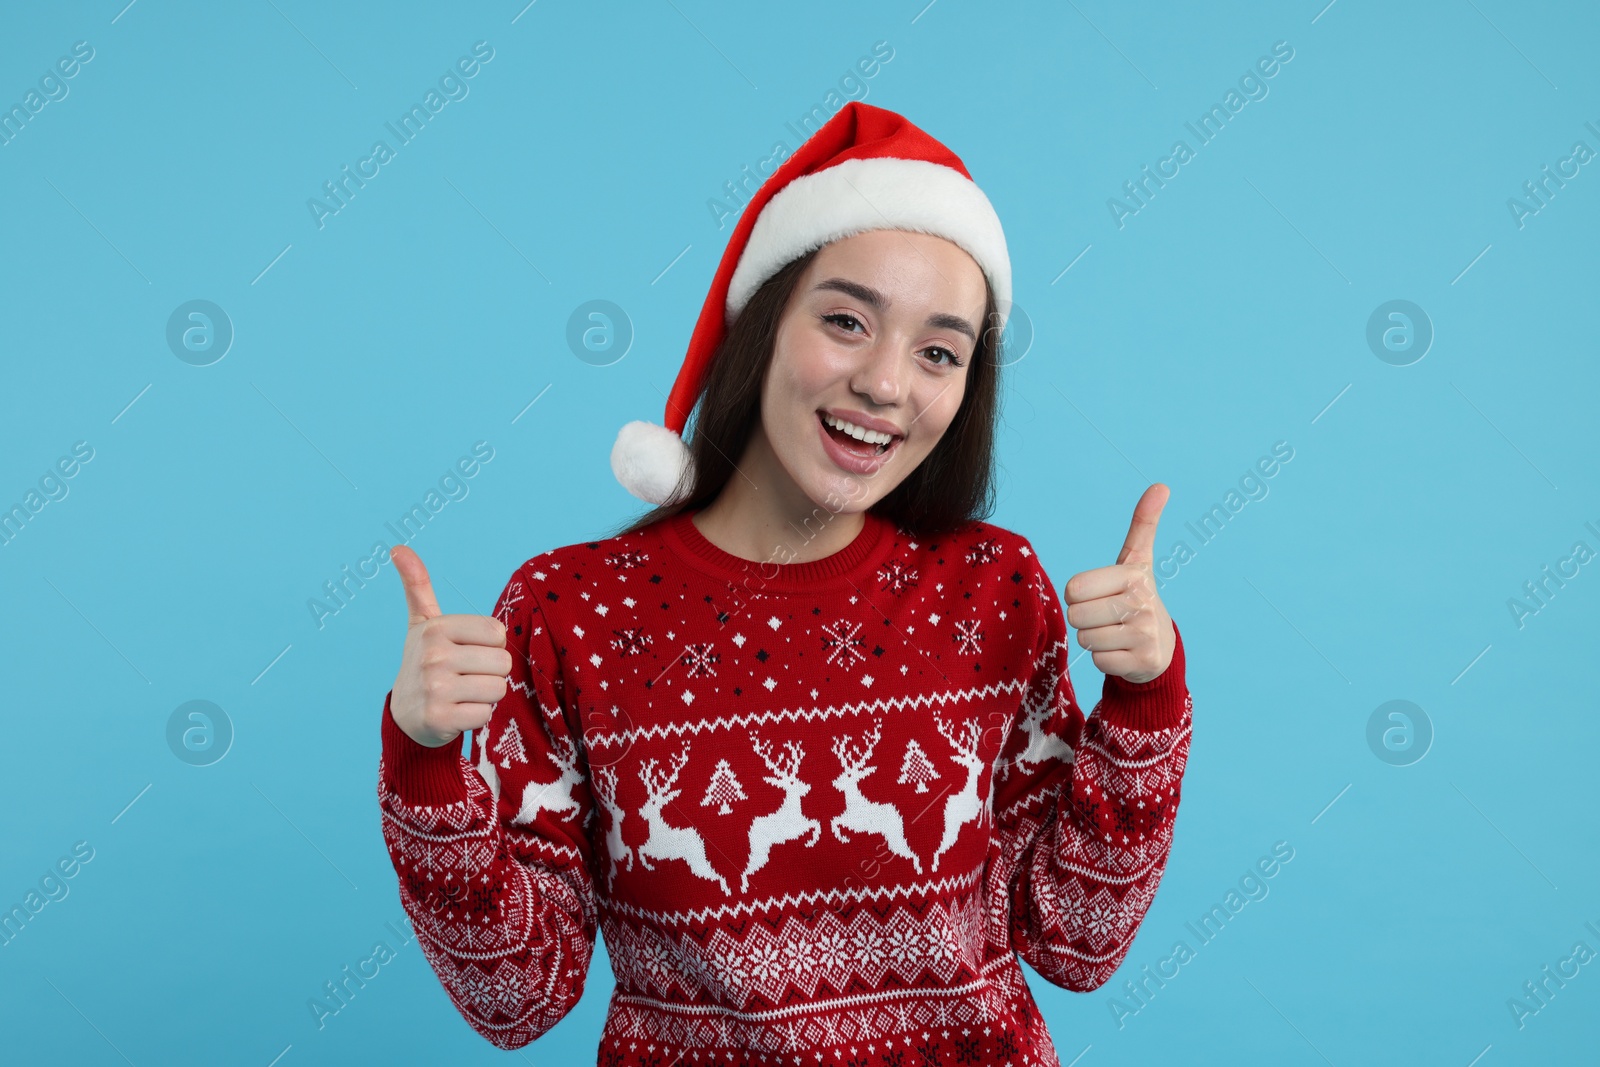 Photo of Happy young woman in Christmas sweater and Santa hat showing thumbs up on light blue background